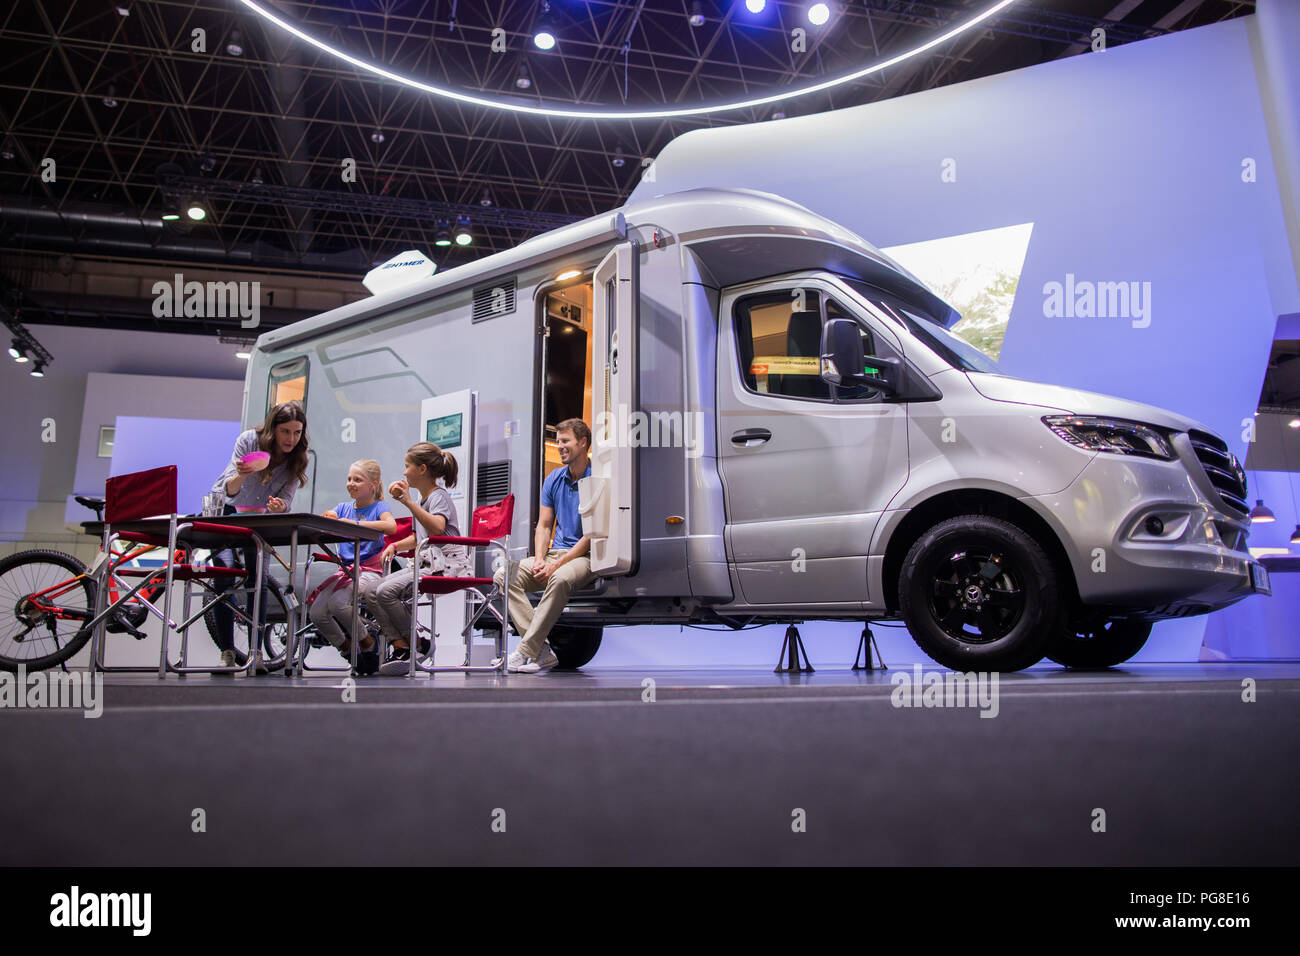 24 August 2018, Germany, Düsseldorf: Hilal (l) and Frank (r) and the  children Mathilde (l) and Lucie sit in front of the new Hymer Modern  Comfort. The world's largest camping fair Caravan